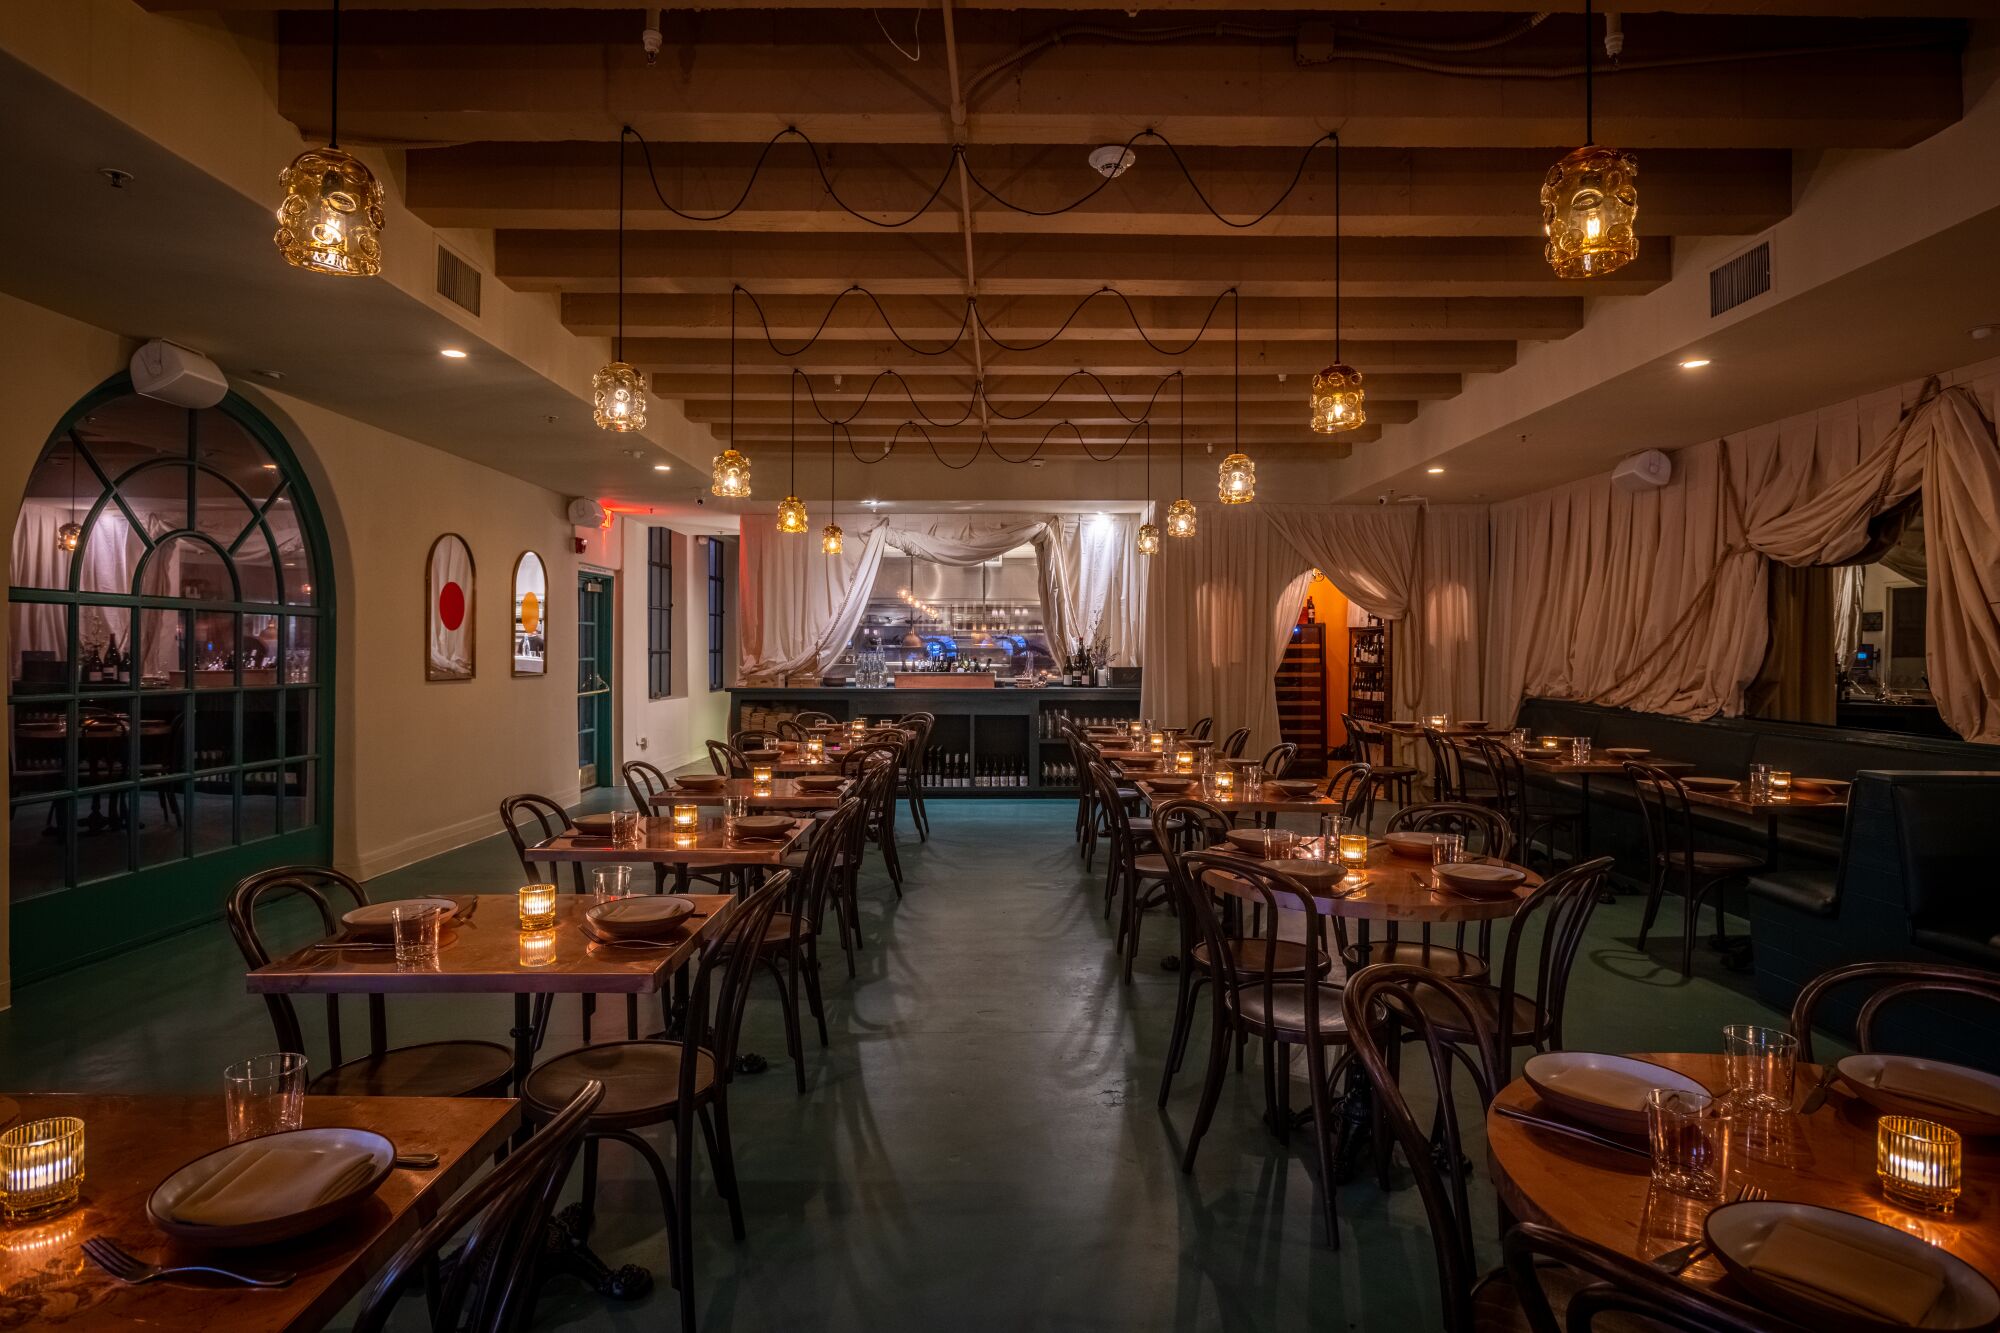 Bar Chelou has taken over the restaurant space adjacent to the Pasadena Playhouse, serving global, modern bistro fare.